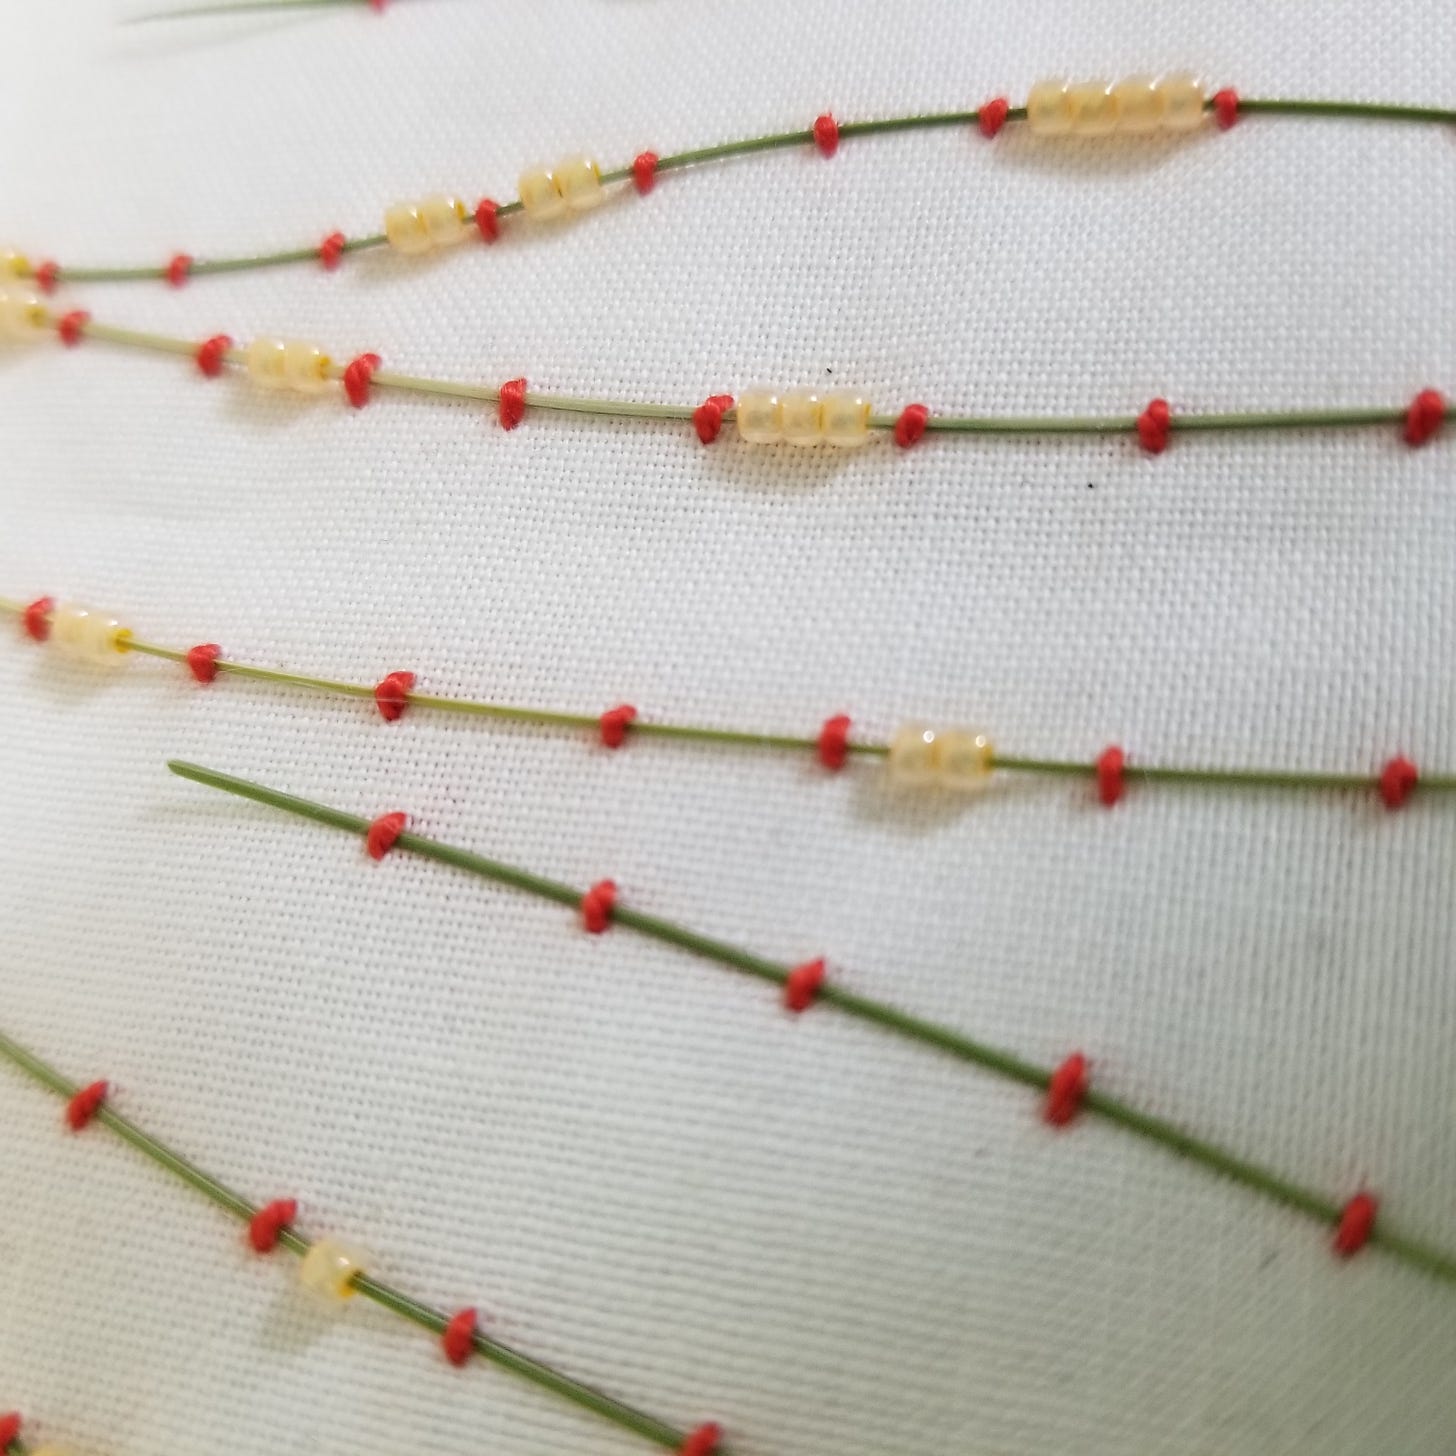 dried grass couched to muslin fabric with pink thread and peach glass beads